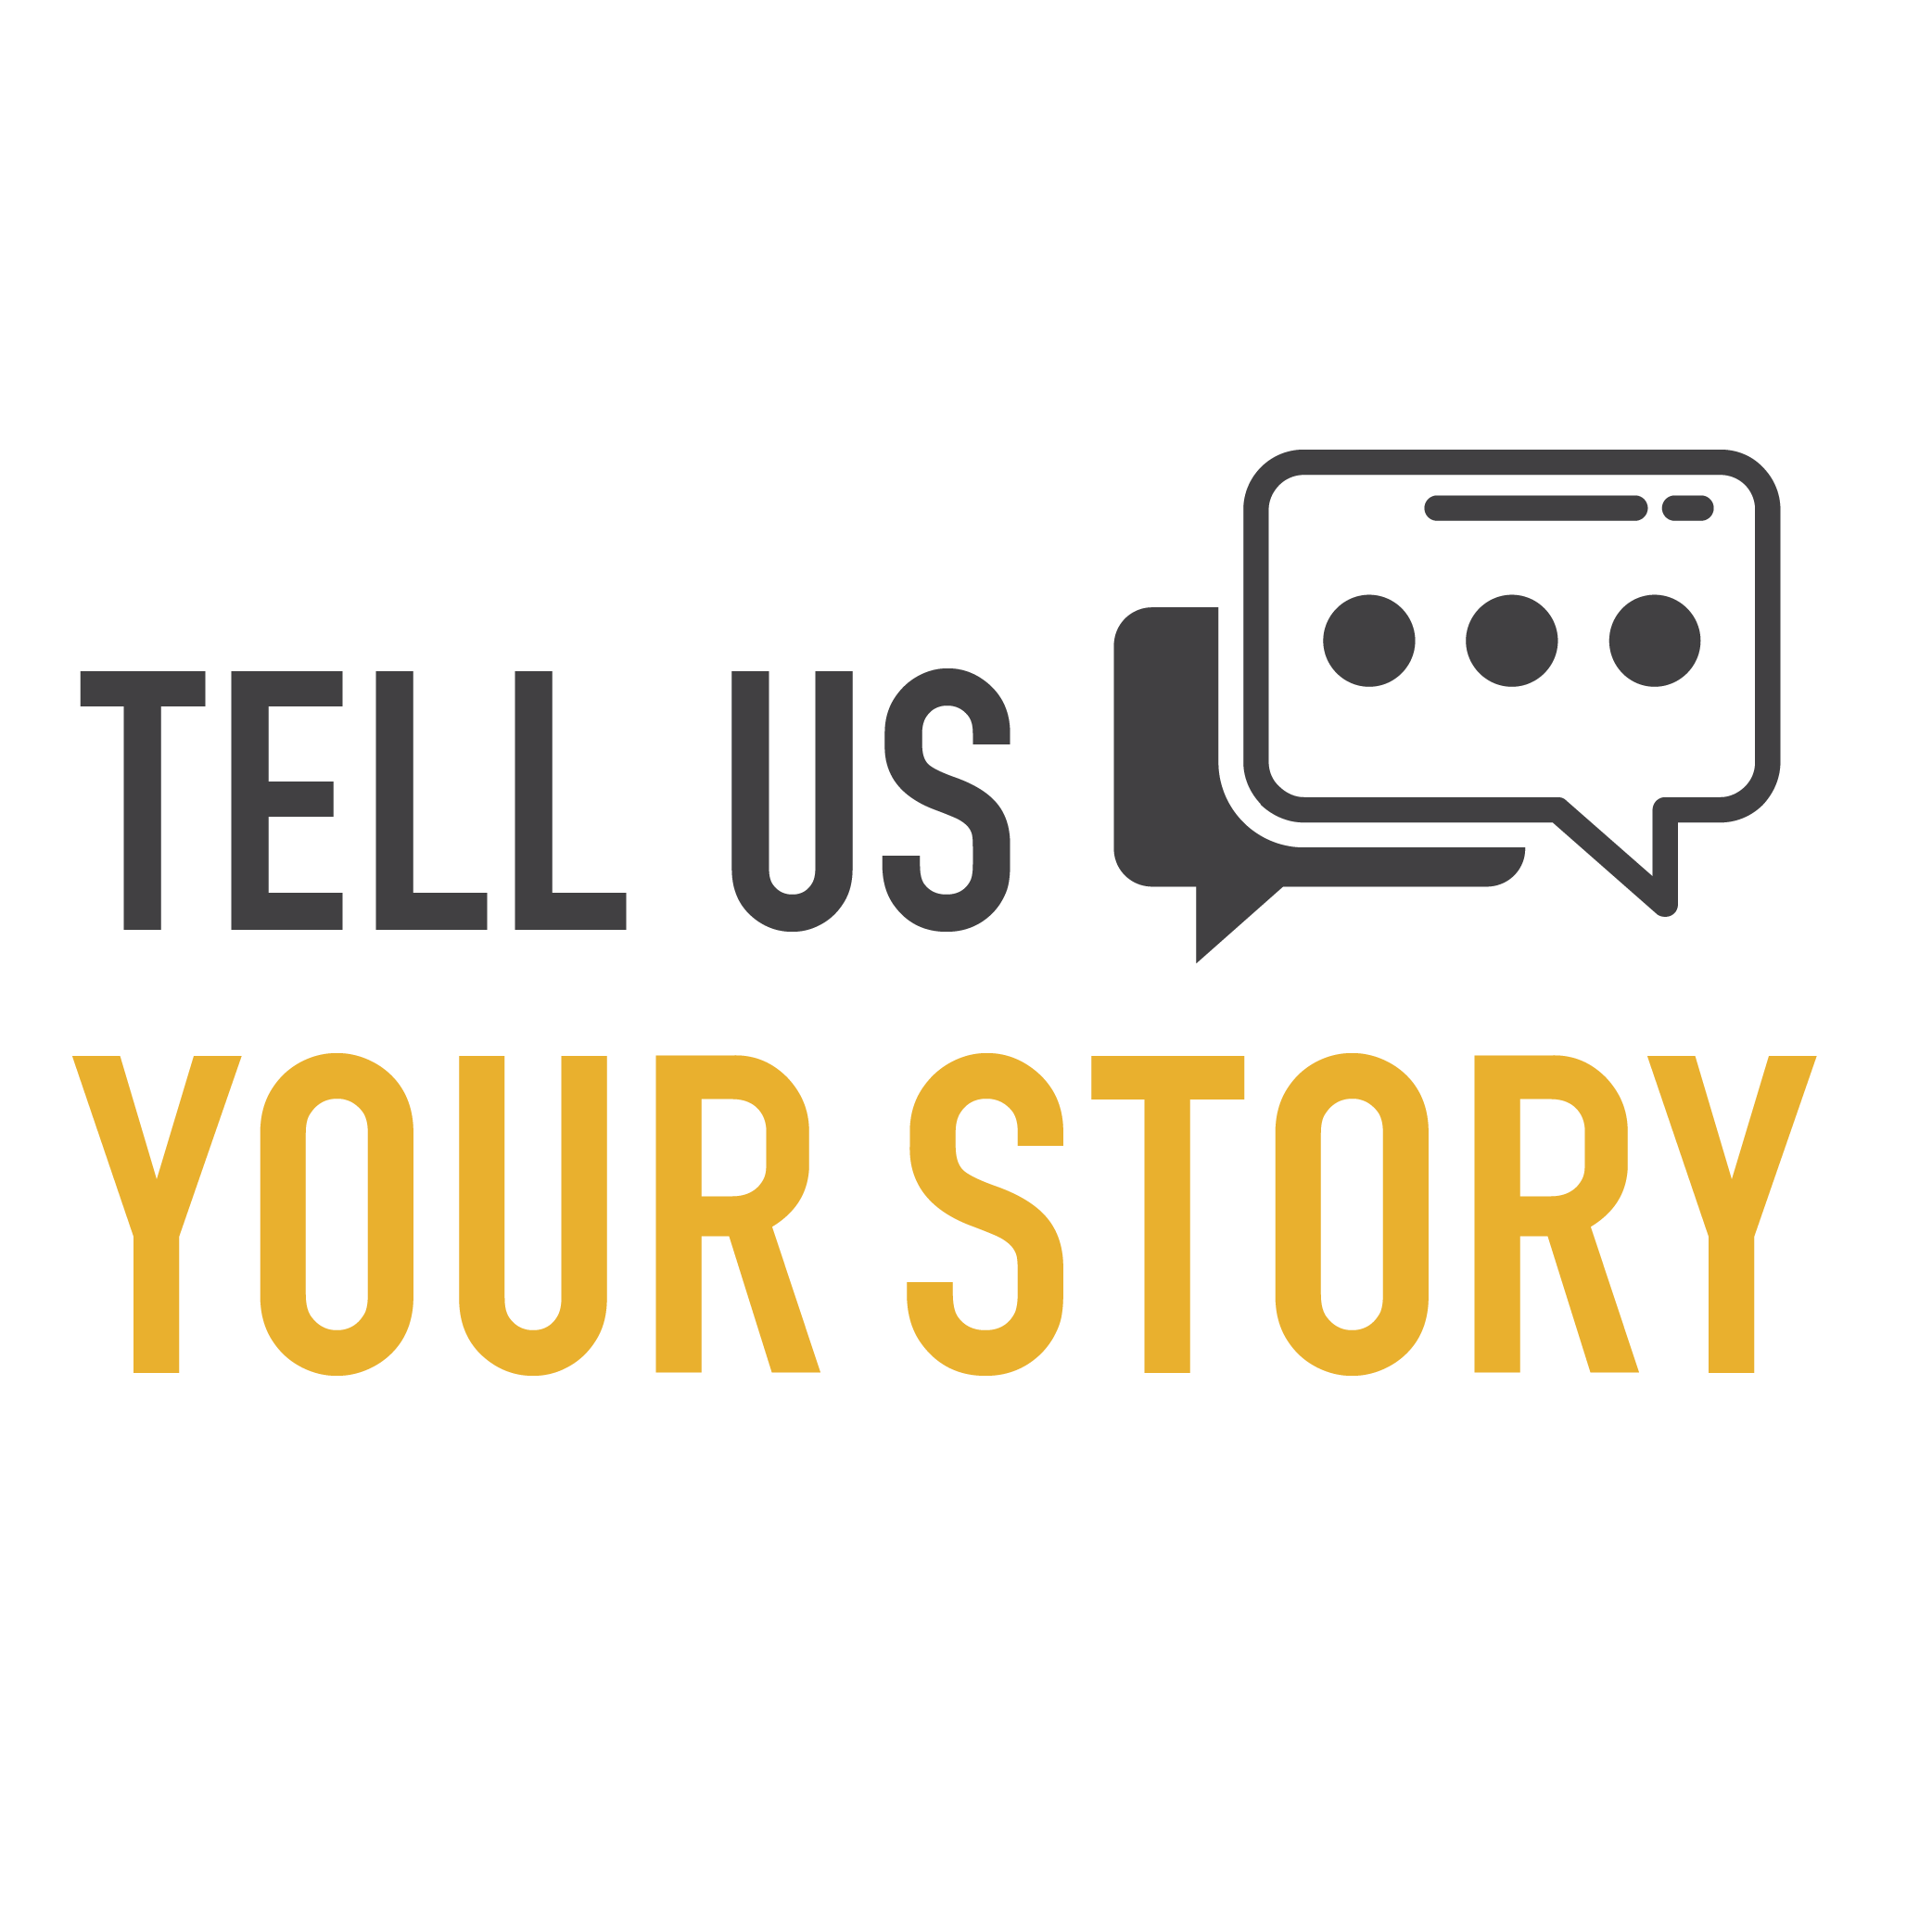 *Tell Us Your Story